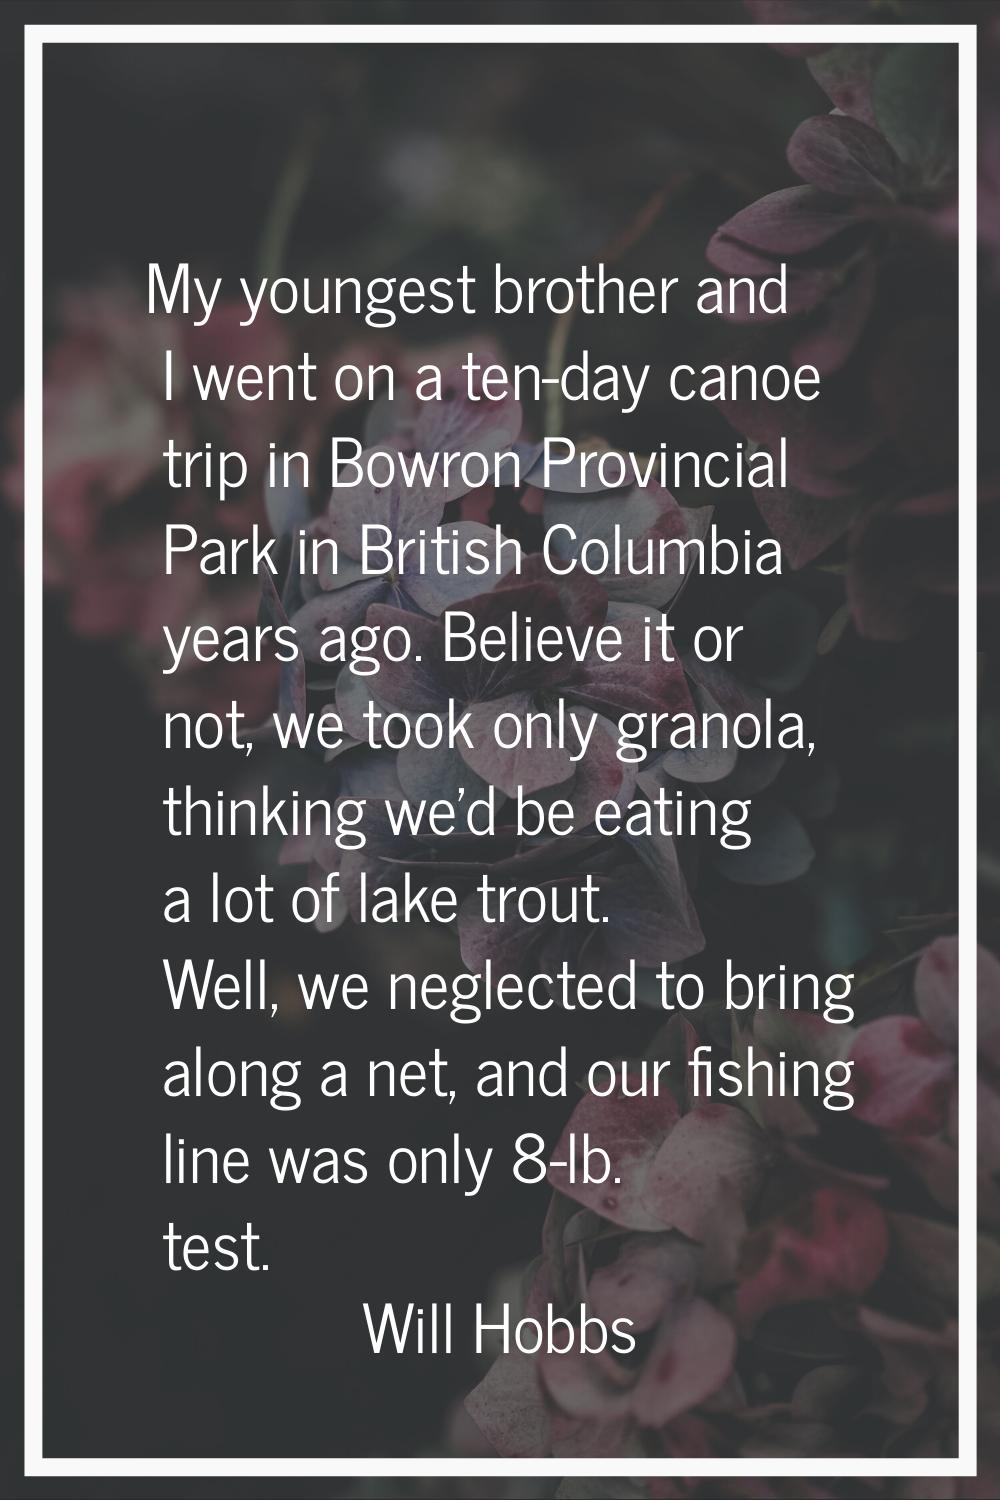 My youngest brother and I went on a ten-day canoe trip in Bowron Provincial Park in British Columbi